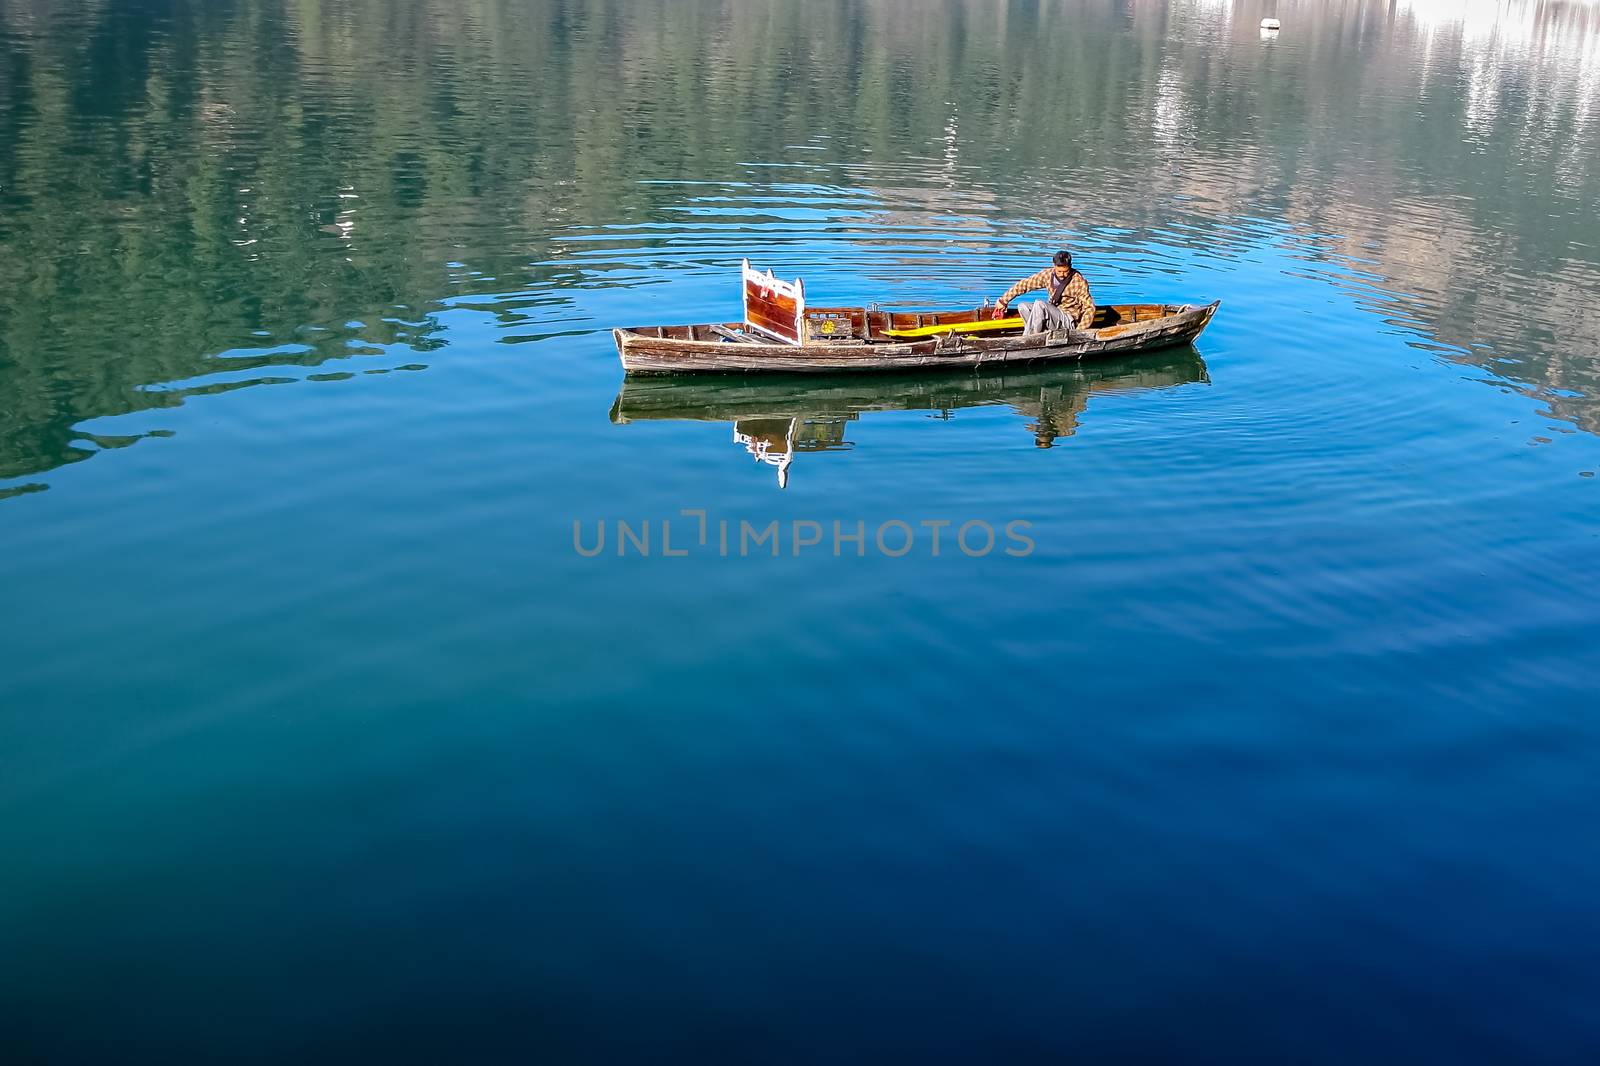 Boatman rowing his small boat in blue waters of Bhimtal lake. by lalam